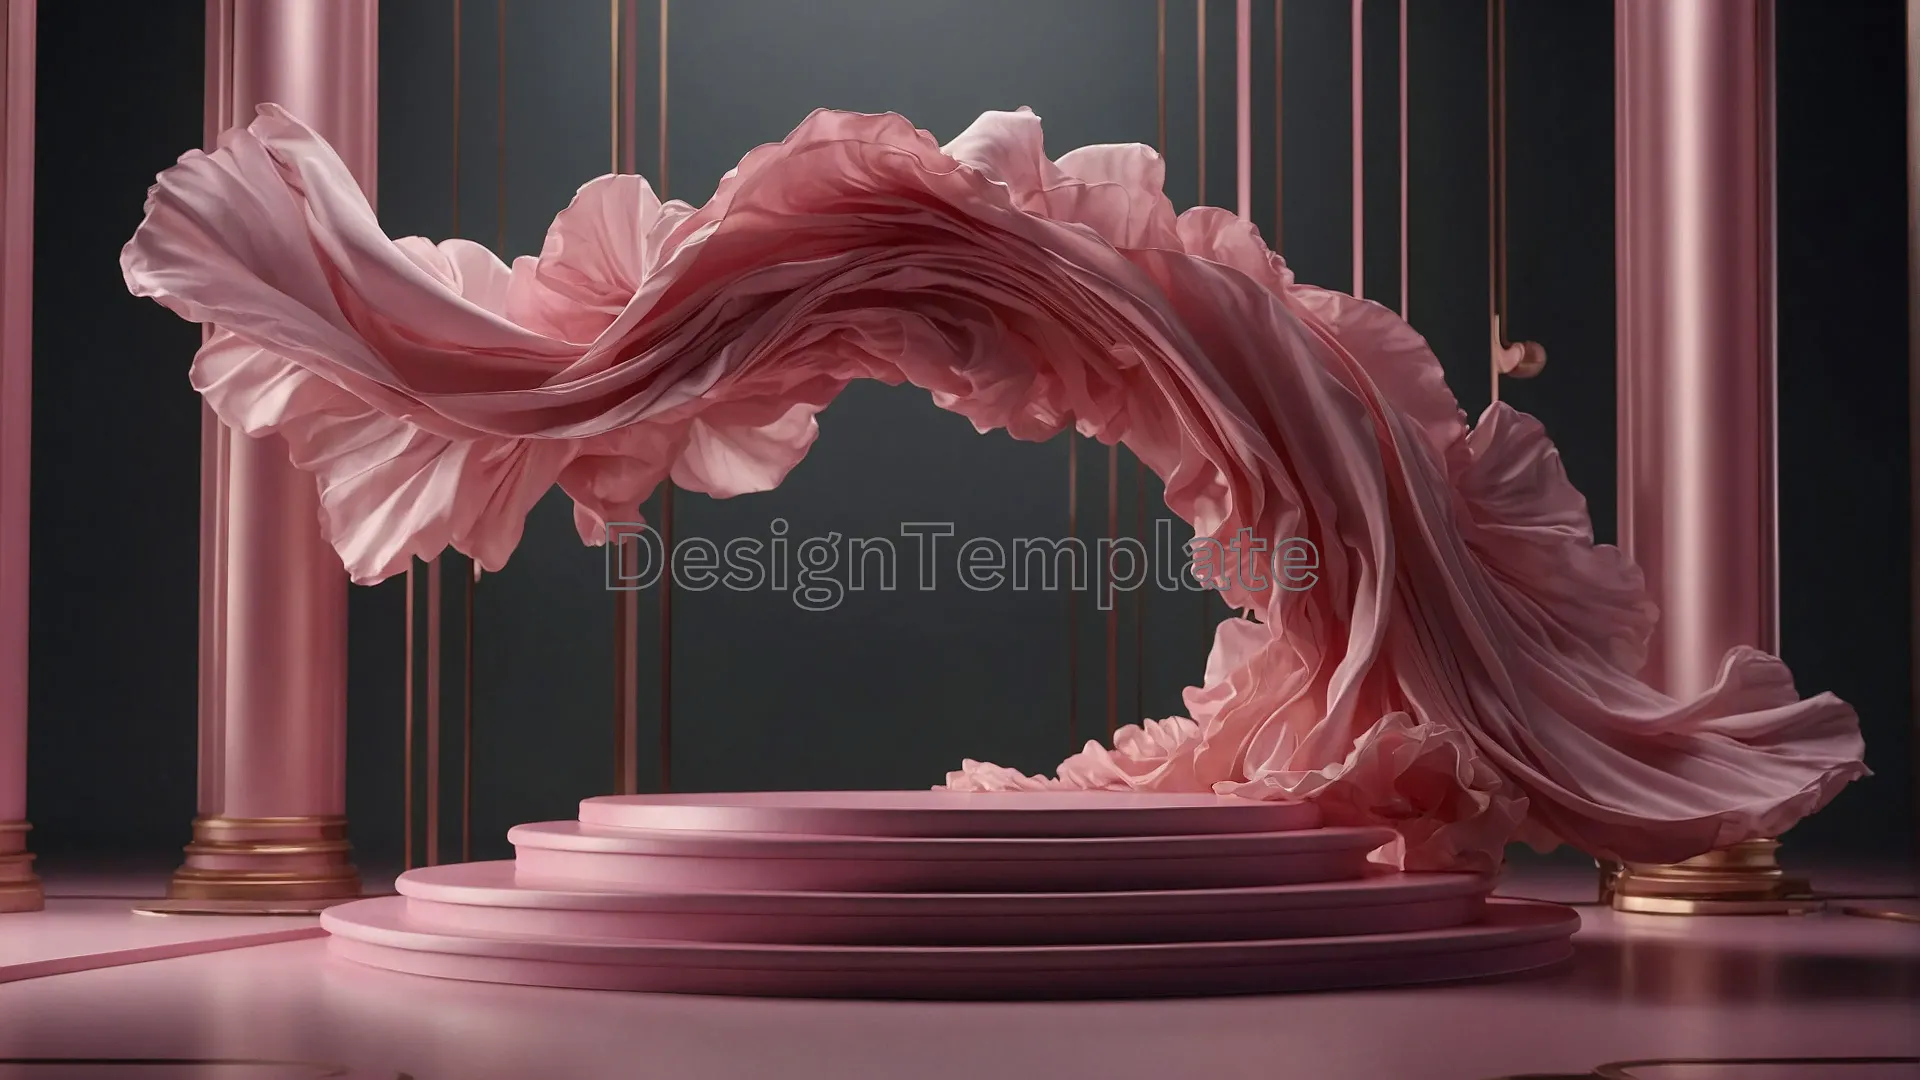 Luxurious 3D Podium in Middle with Flying Pink Cloth Image image